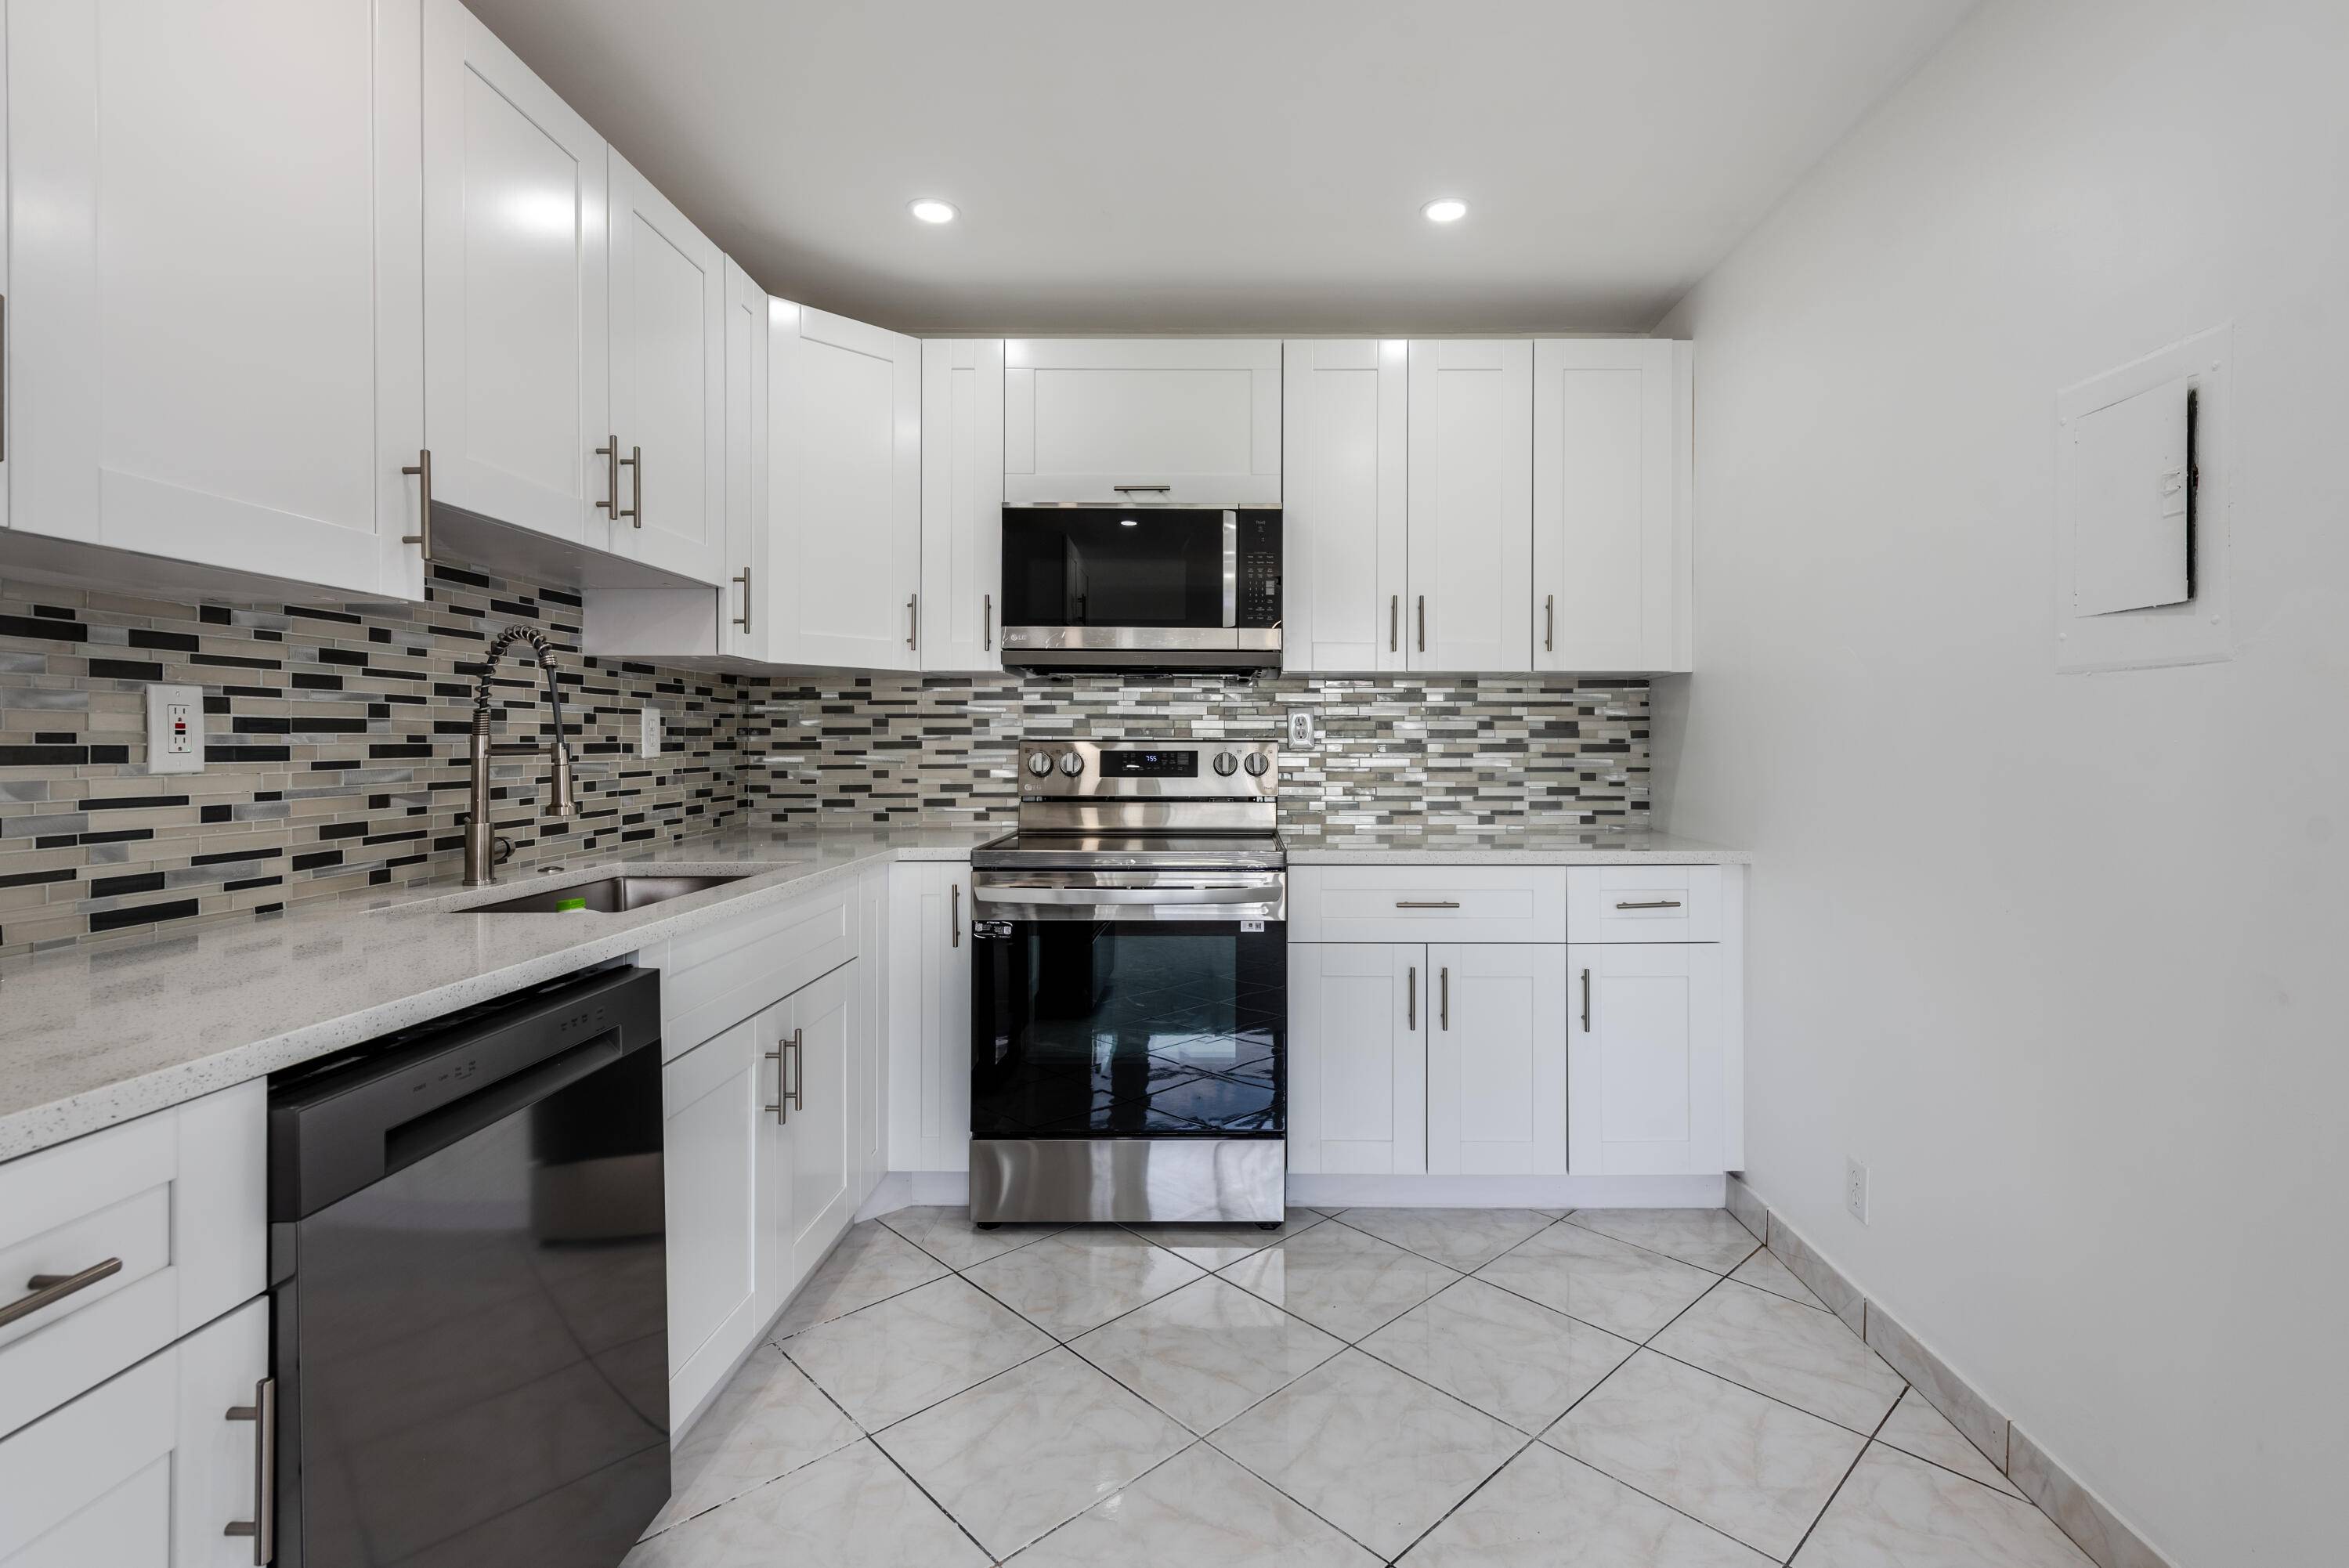 Experience refined living in this remodeled 1 bed, 1.